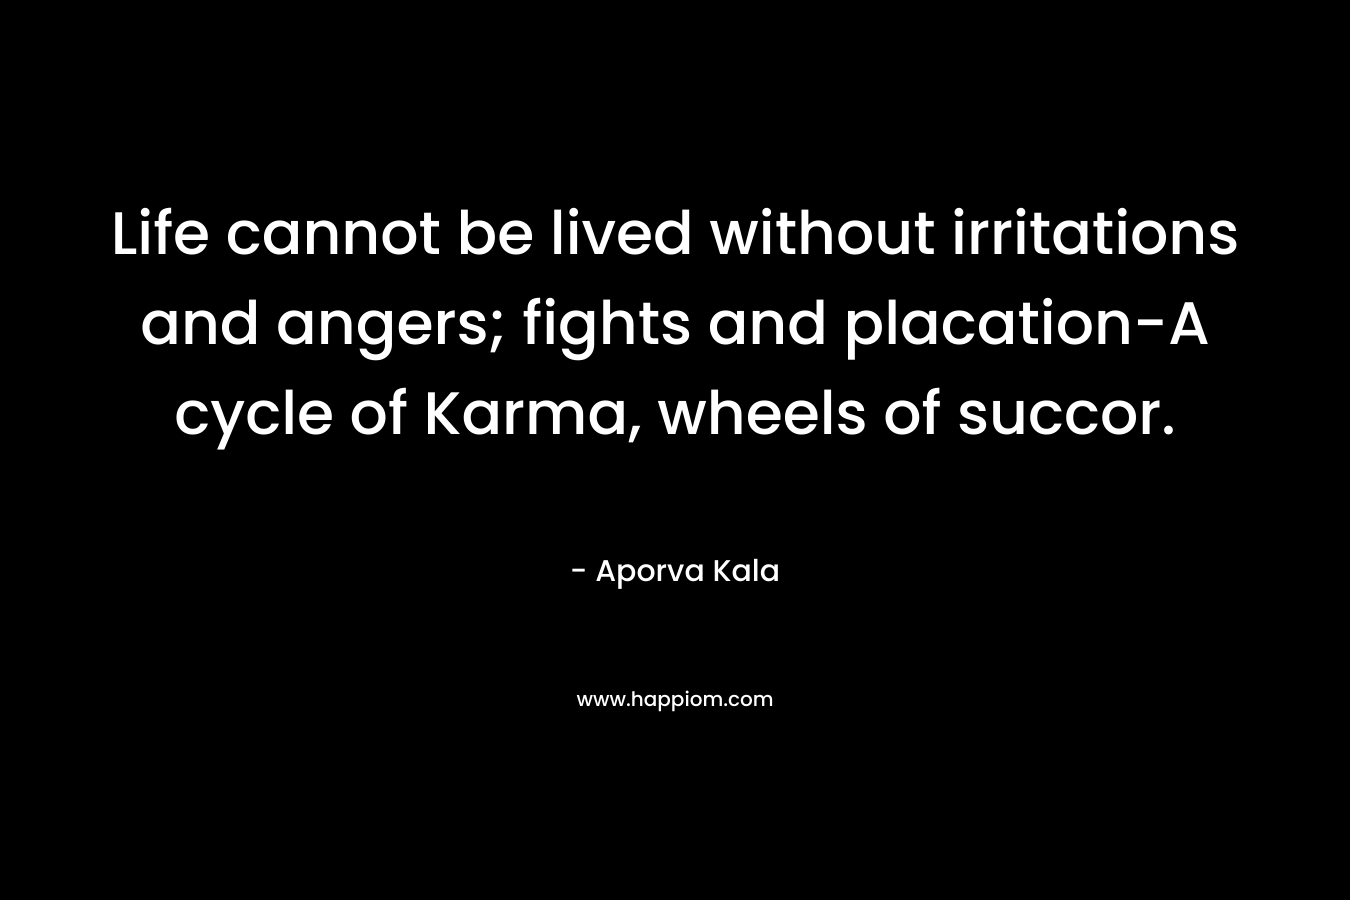 Life cannot be lived without irritations and angers; fights and placation-A cycle of Karma, wheels of succor. – Aporva Kala